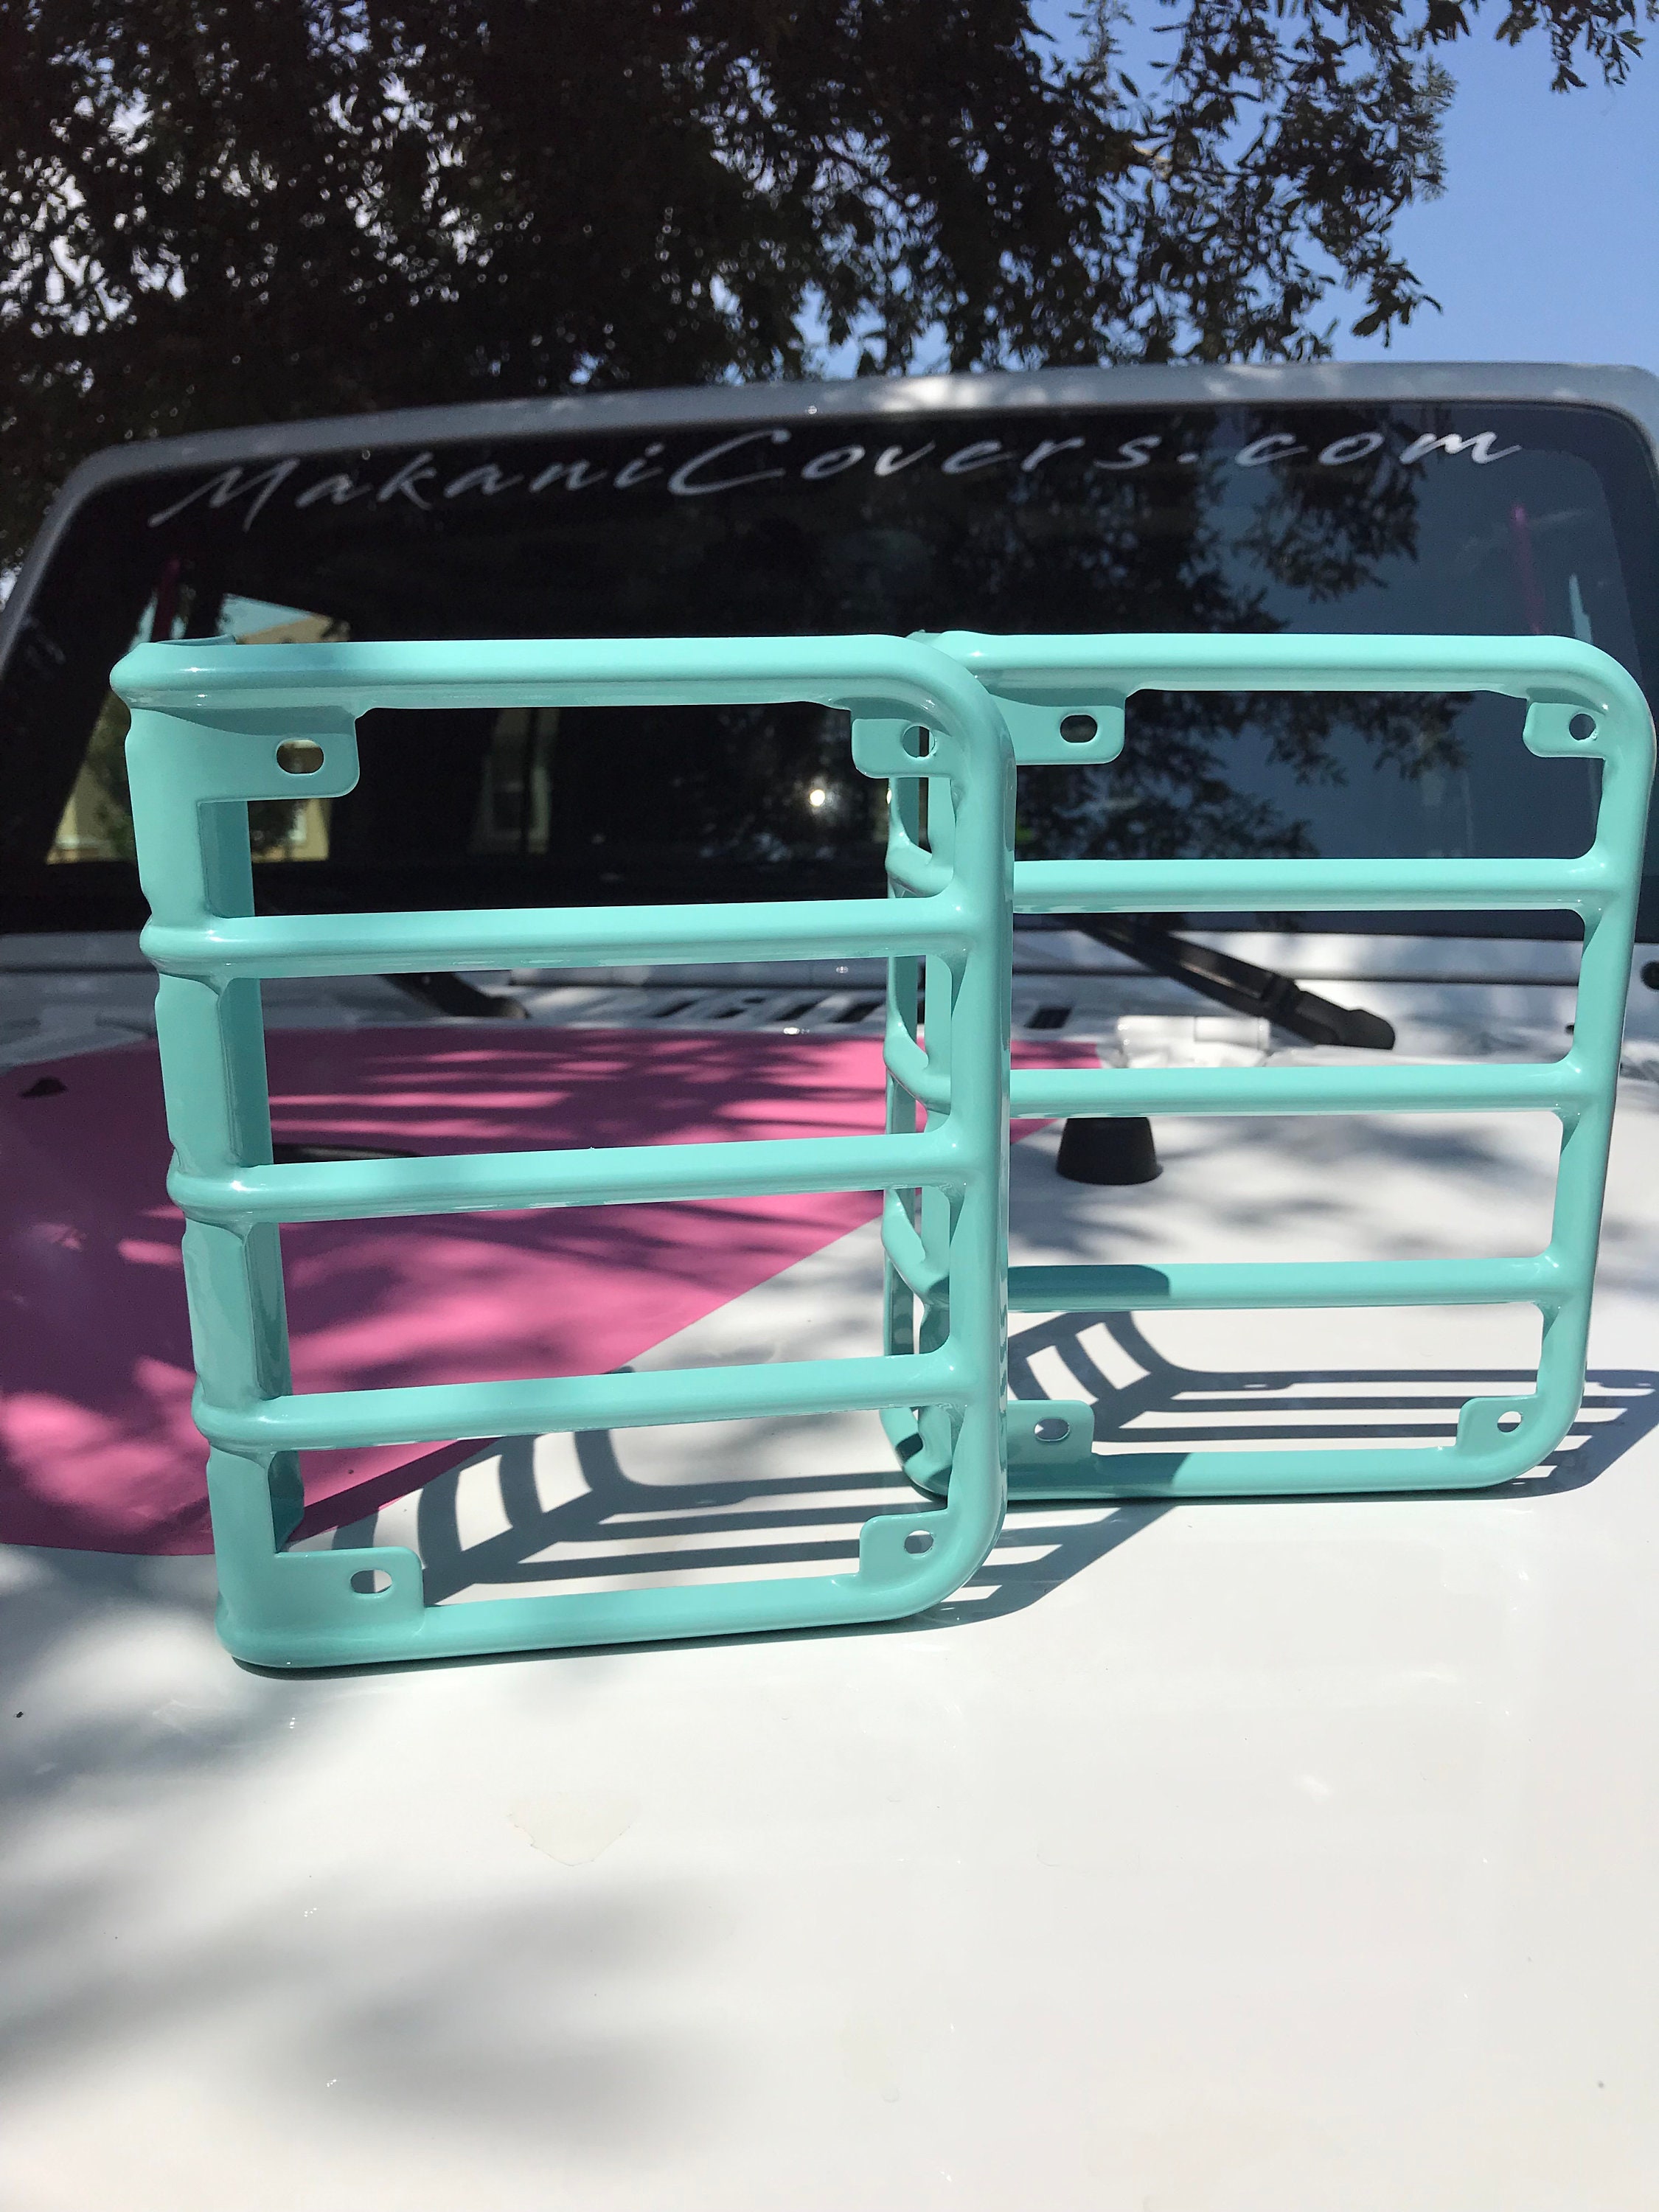 Jeep Wrangler Accessories Robins Egg Blue Tail Light Guards Etsy